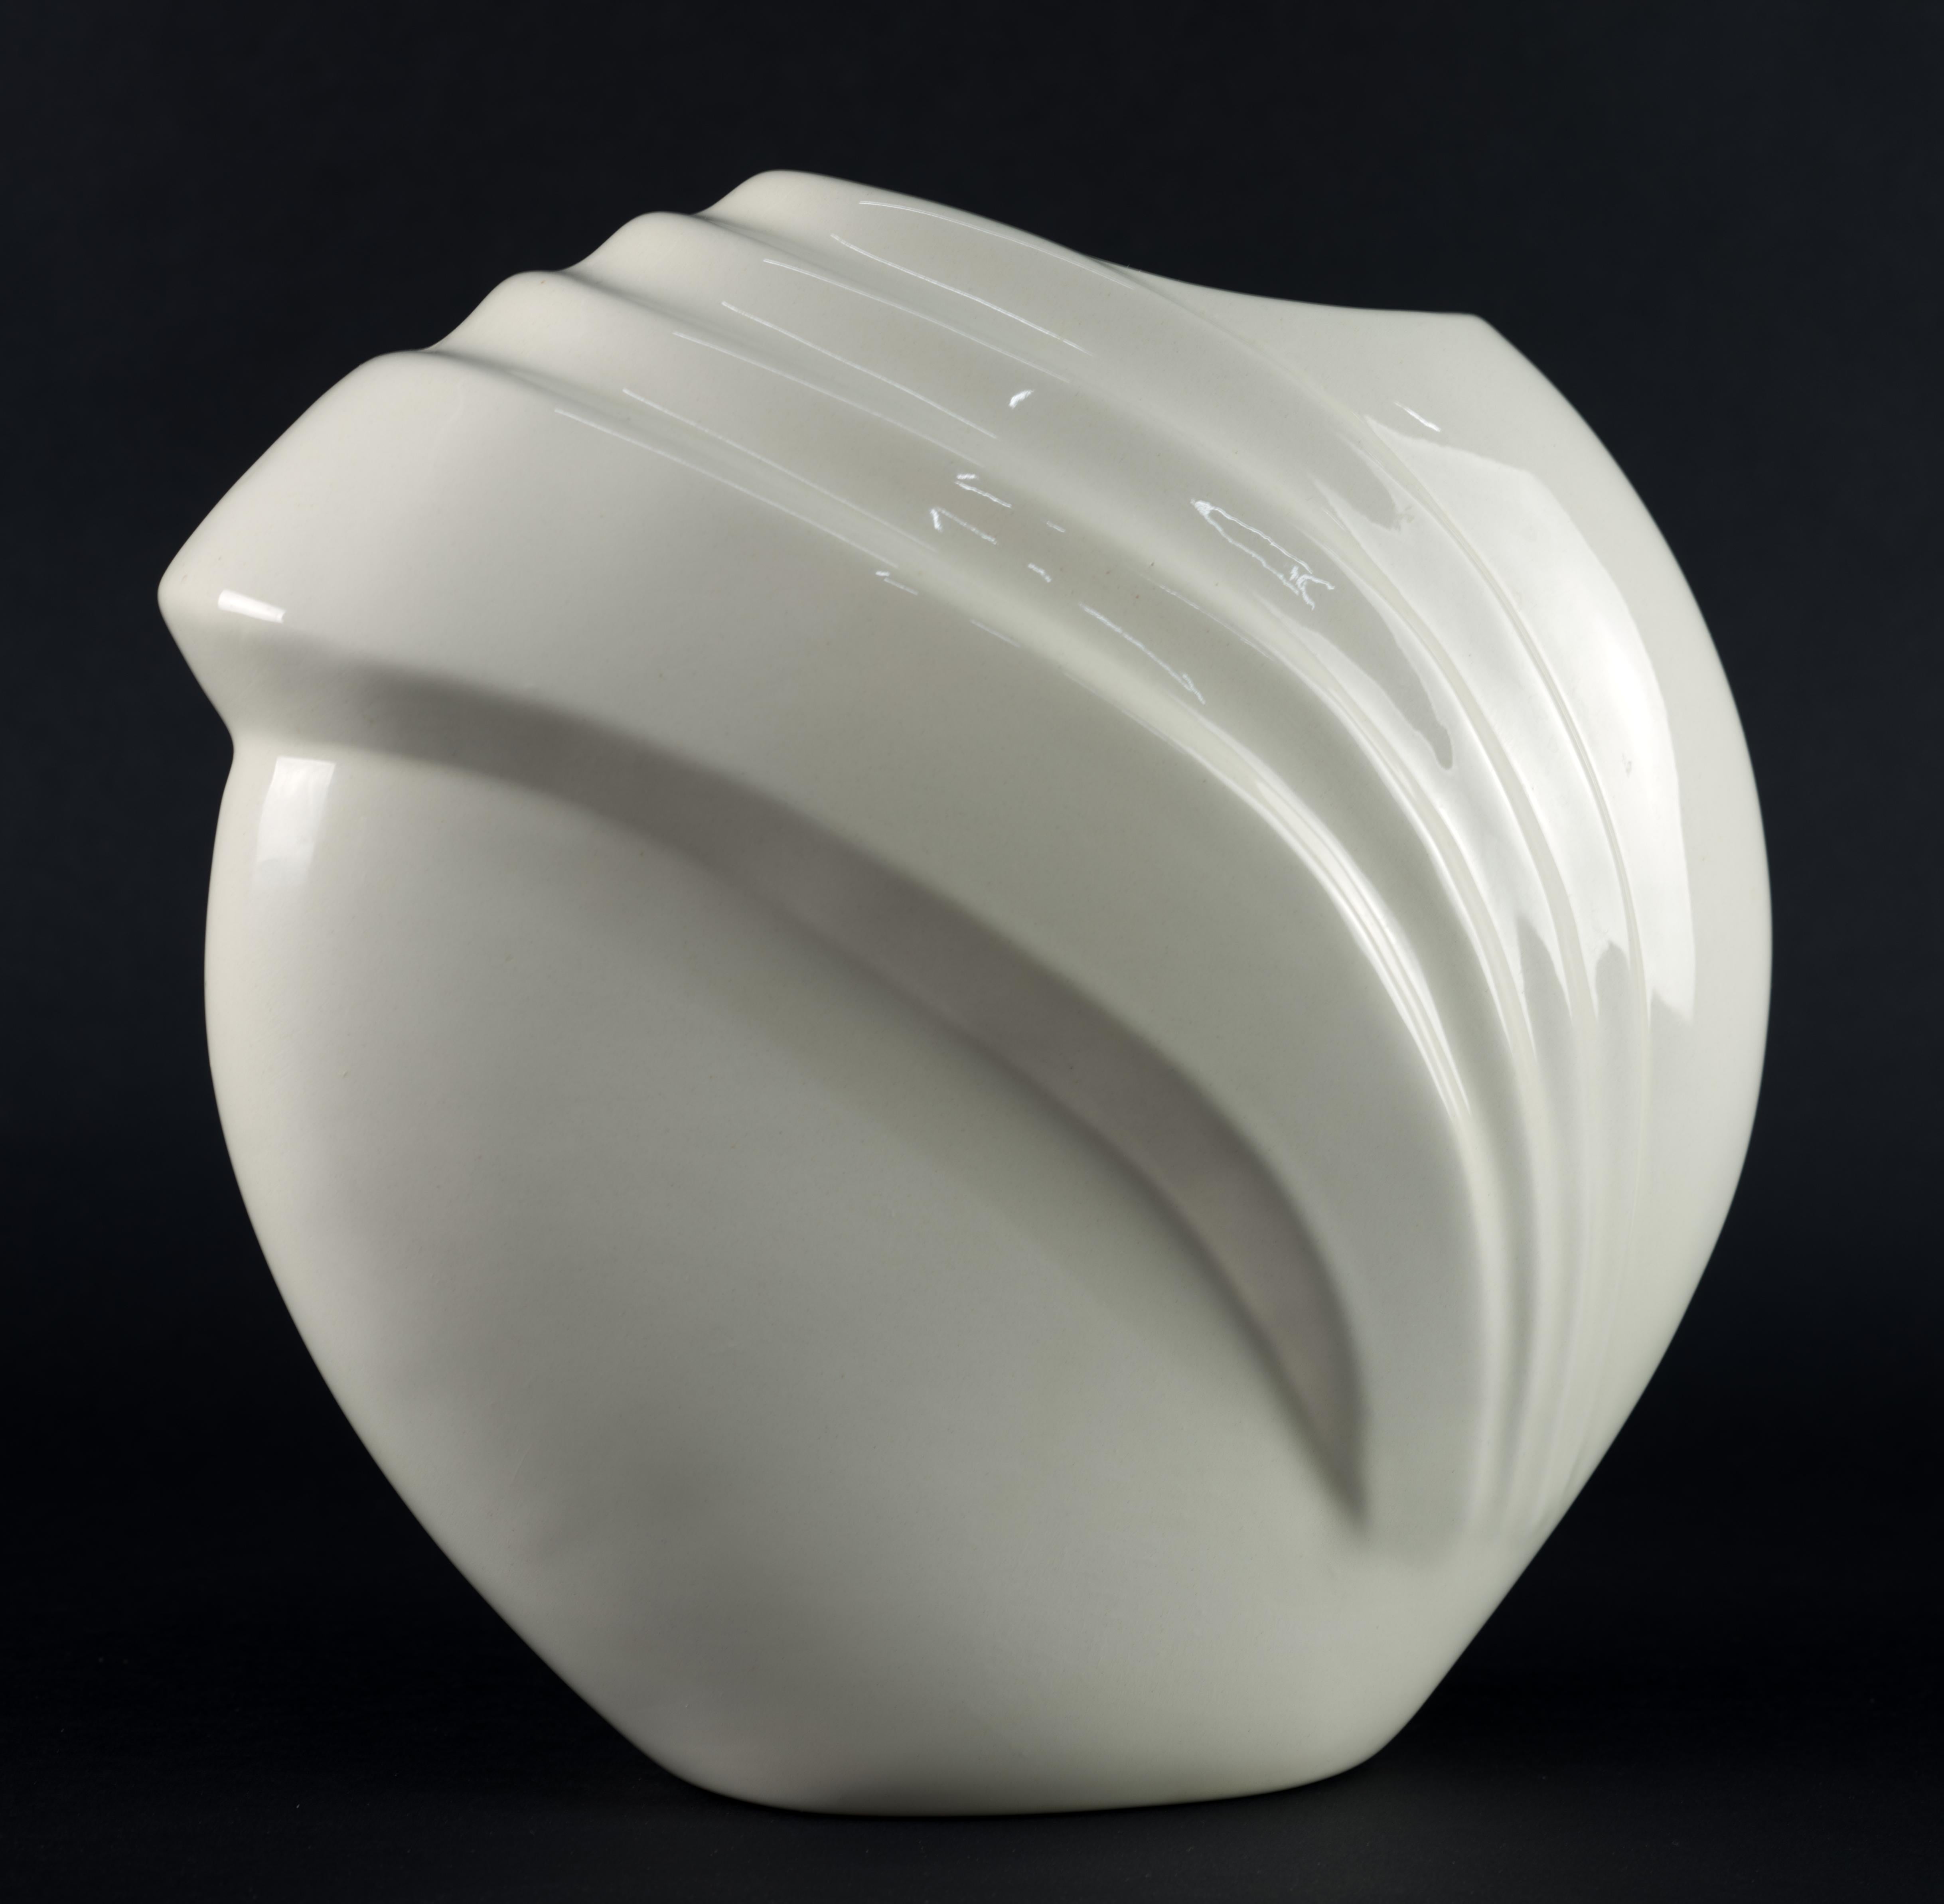 Vintage vase in Art Deco style has rounded profile with pronounced, asymmetrical graphic relief, creating an upwards movement and visual interest. The relief continues on the back side of the vase. The vase is decorated with high shine off-white